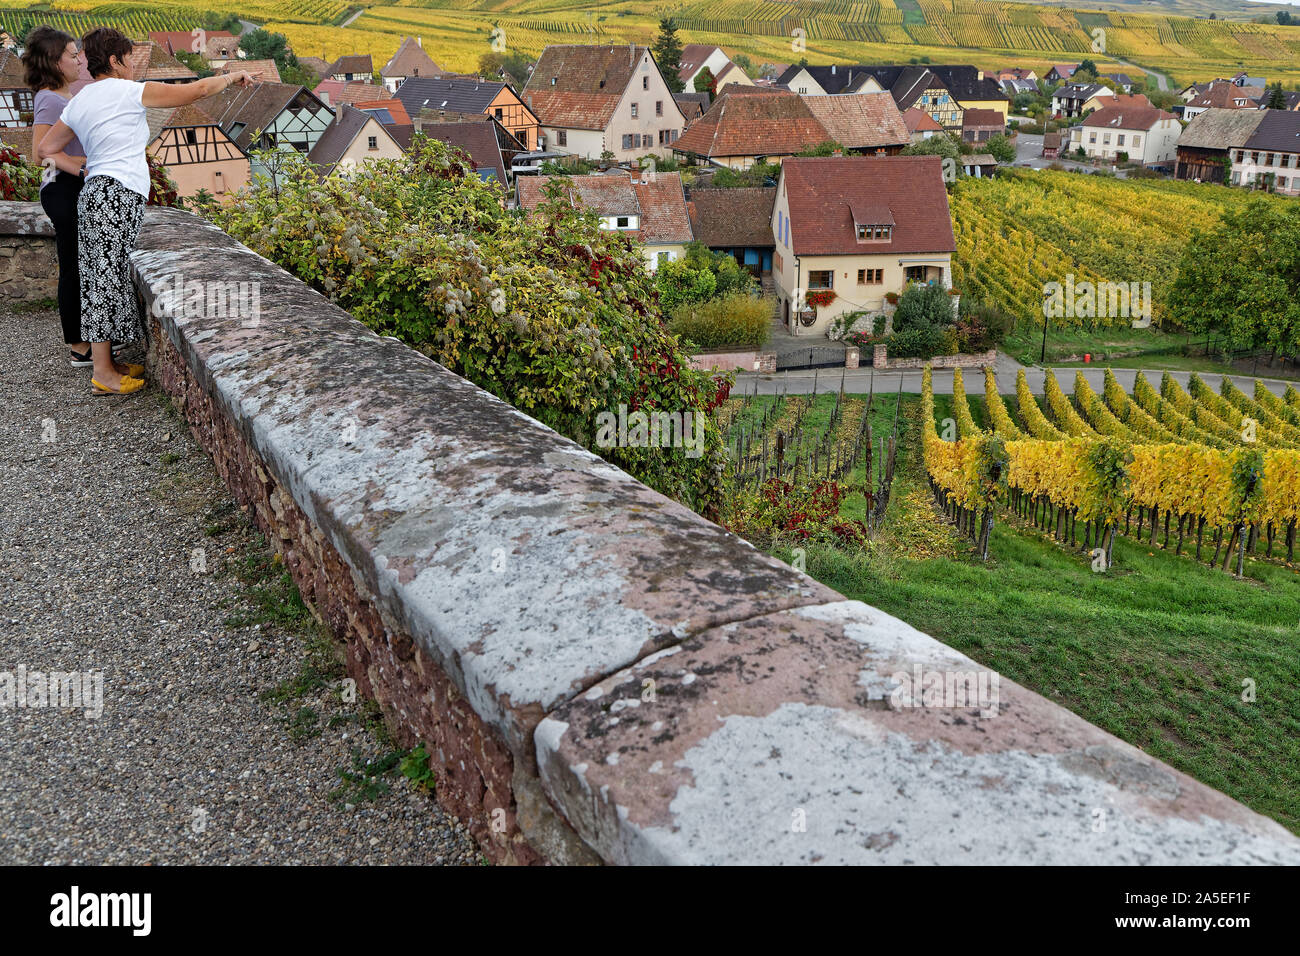 HUNAWIHR, FRANCE, October 13, 2019 : Women admire the vineyard landscape around the village from the fortification of the old church. Stock Photo